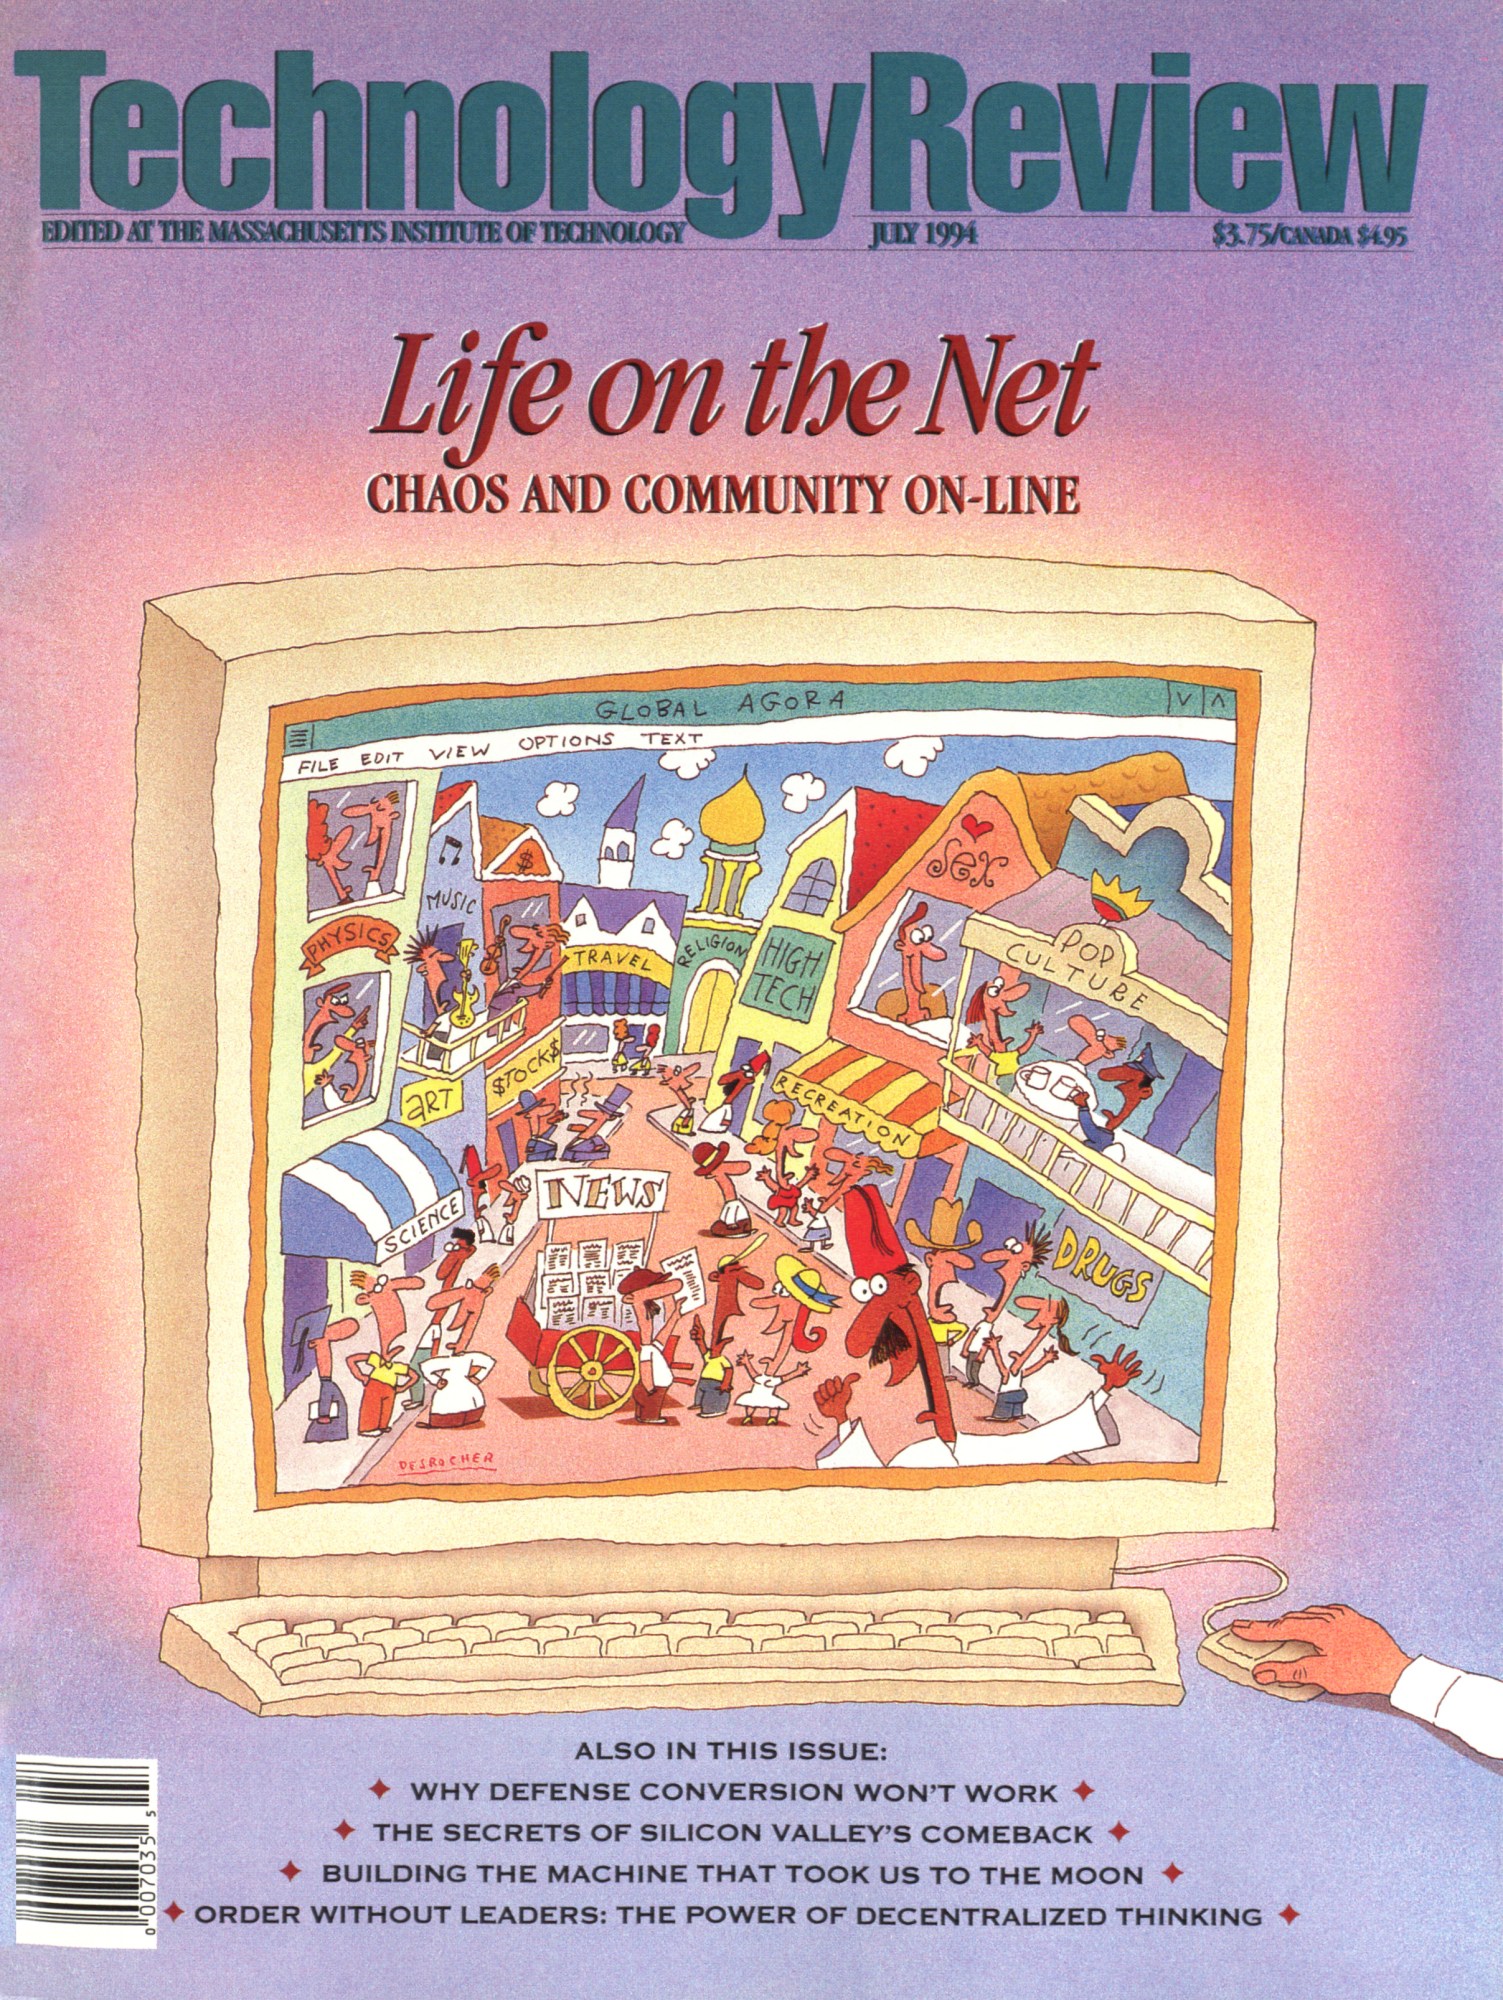 Cover of July 1994